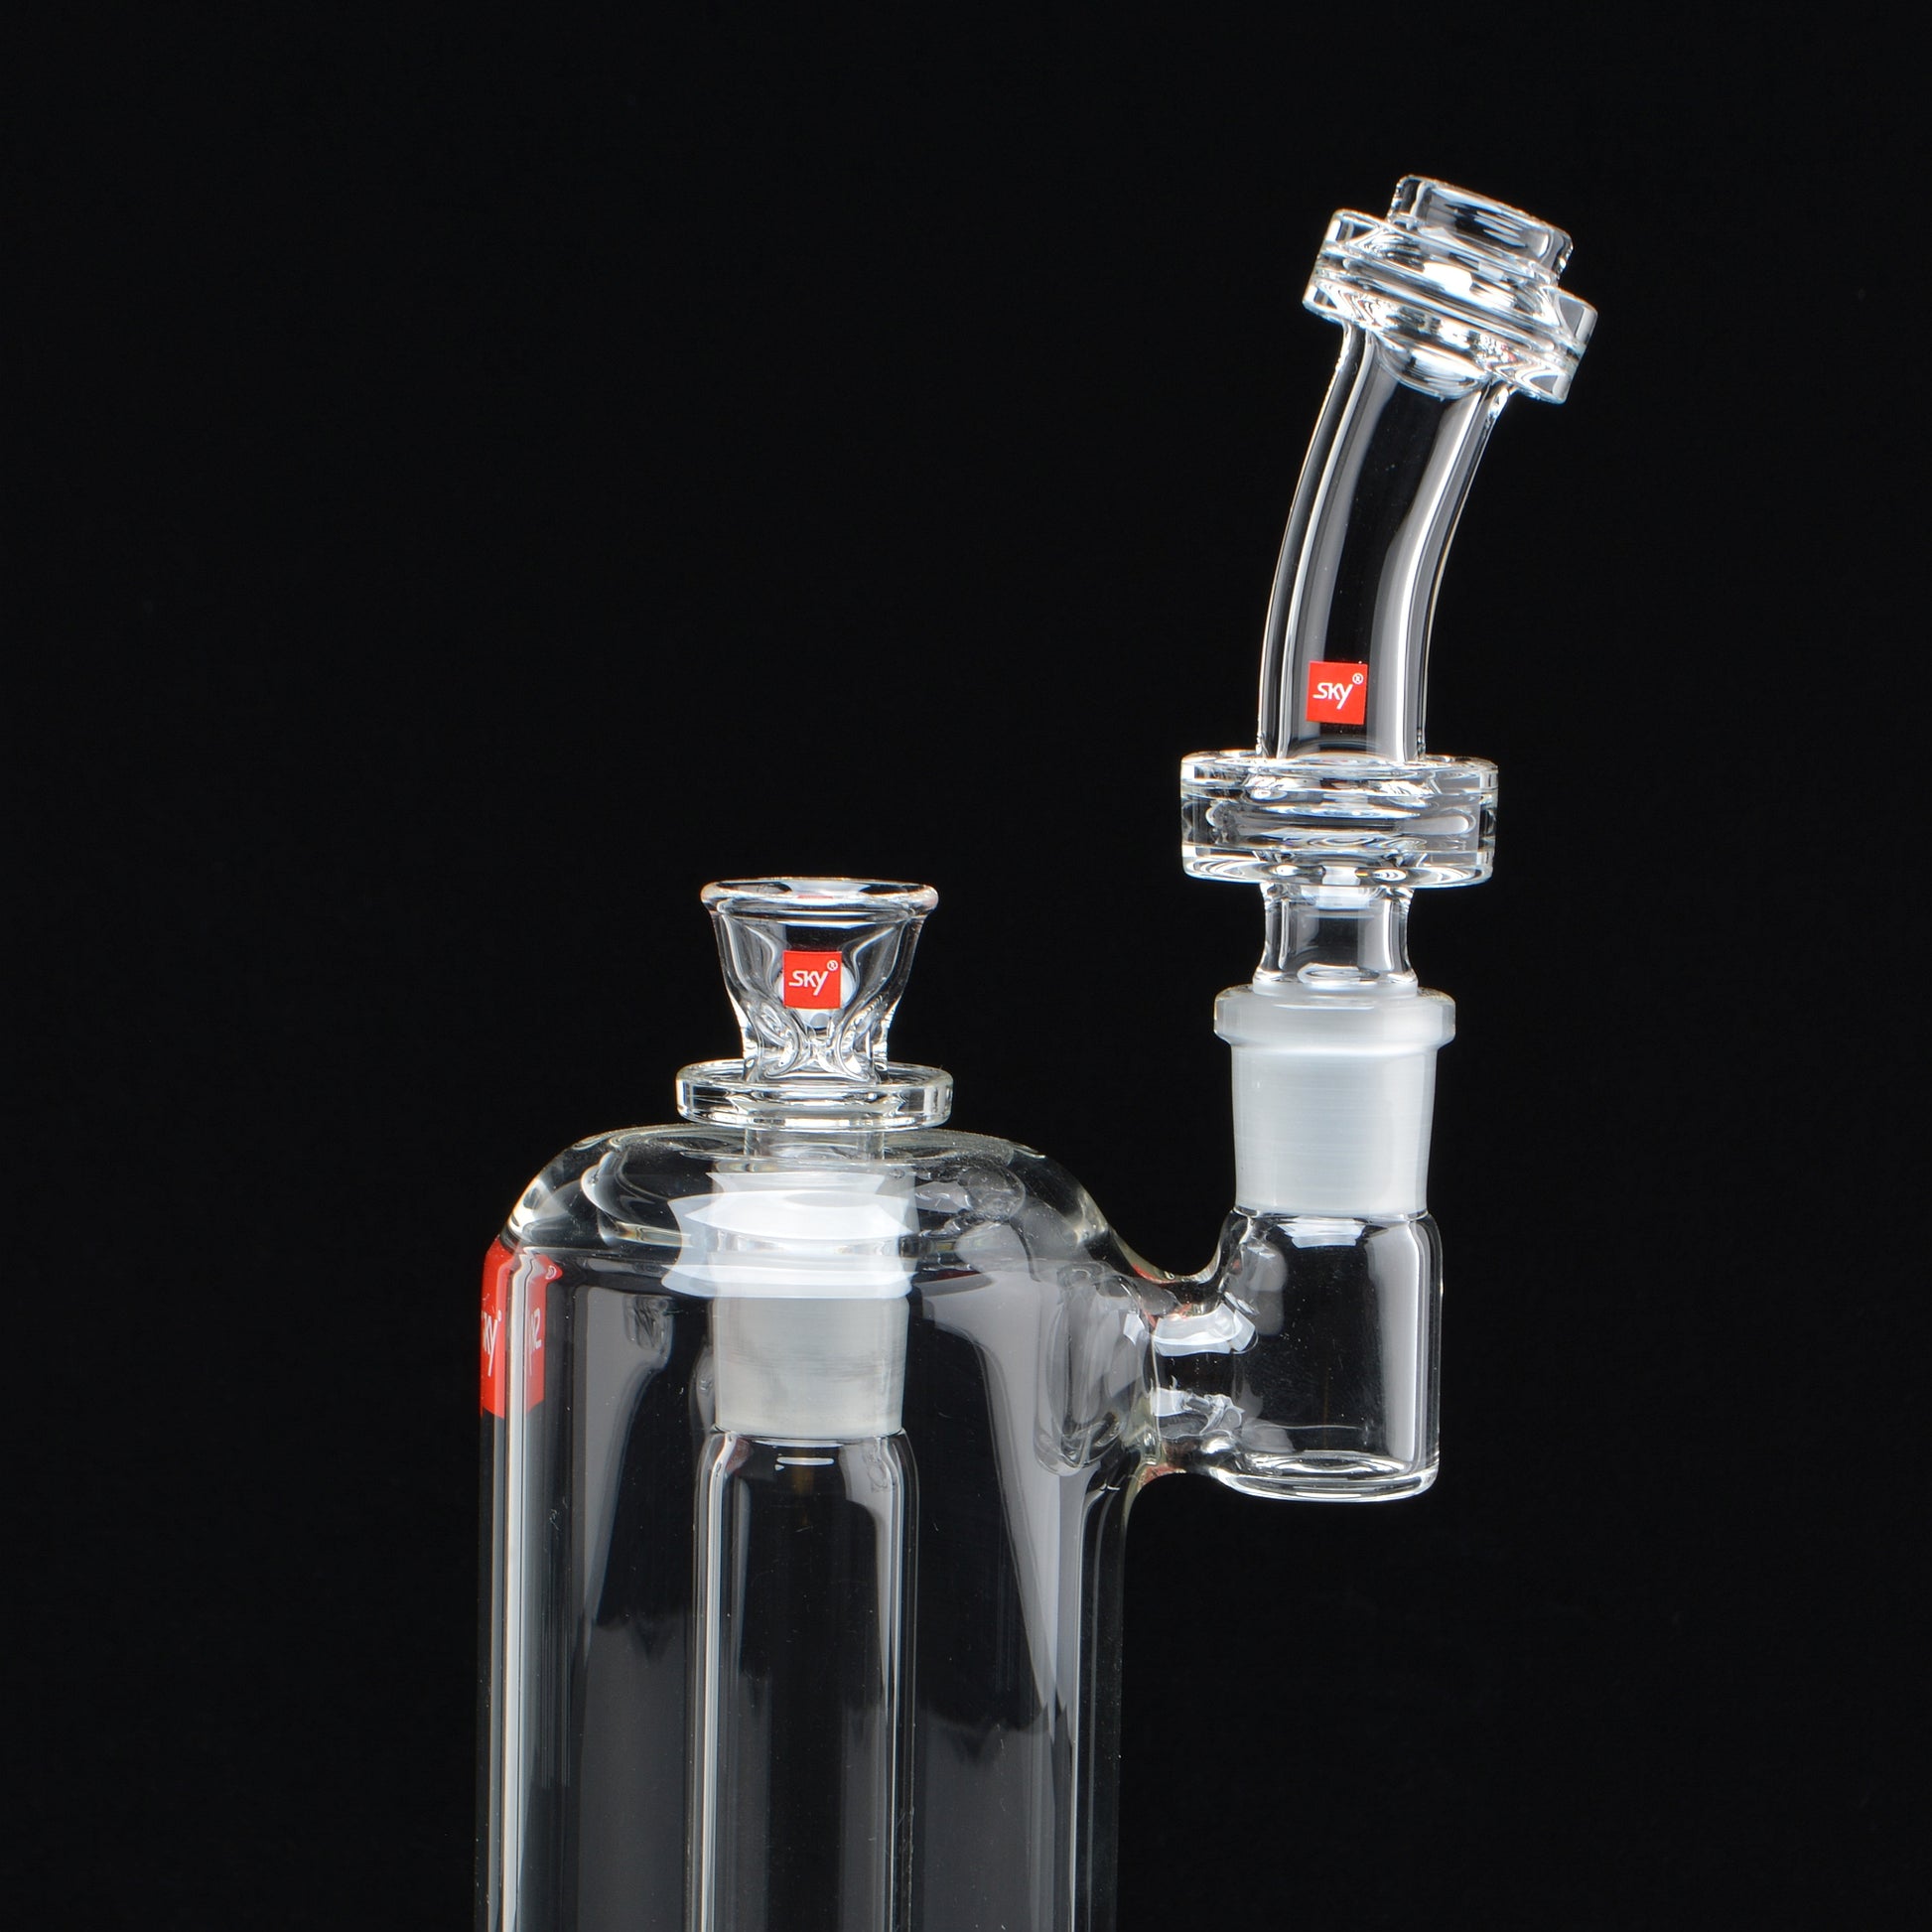 Showerhead Bubbler, with a removable mouthpiece